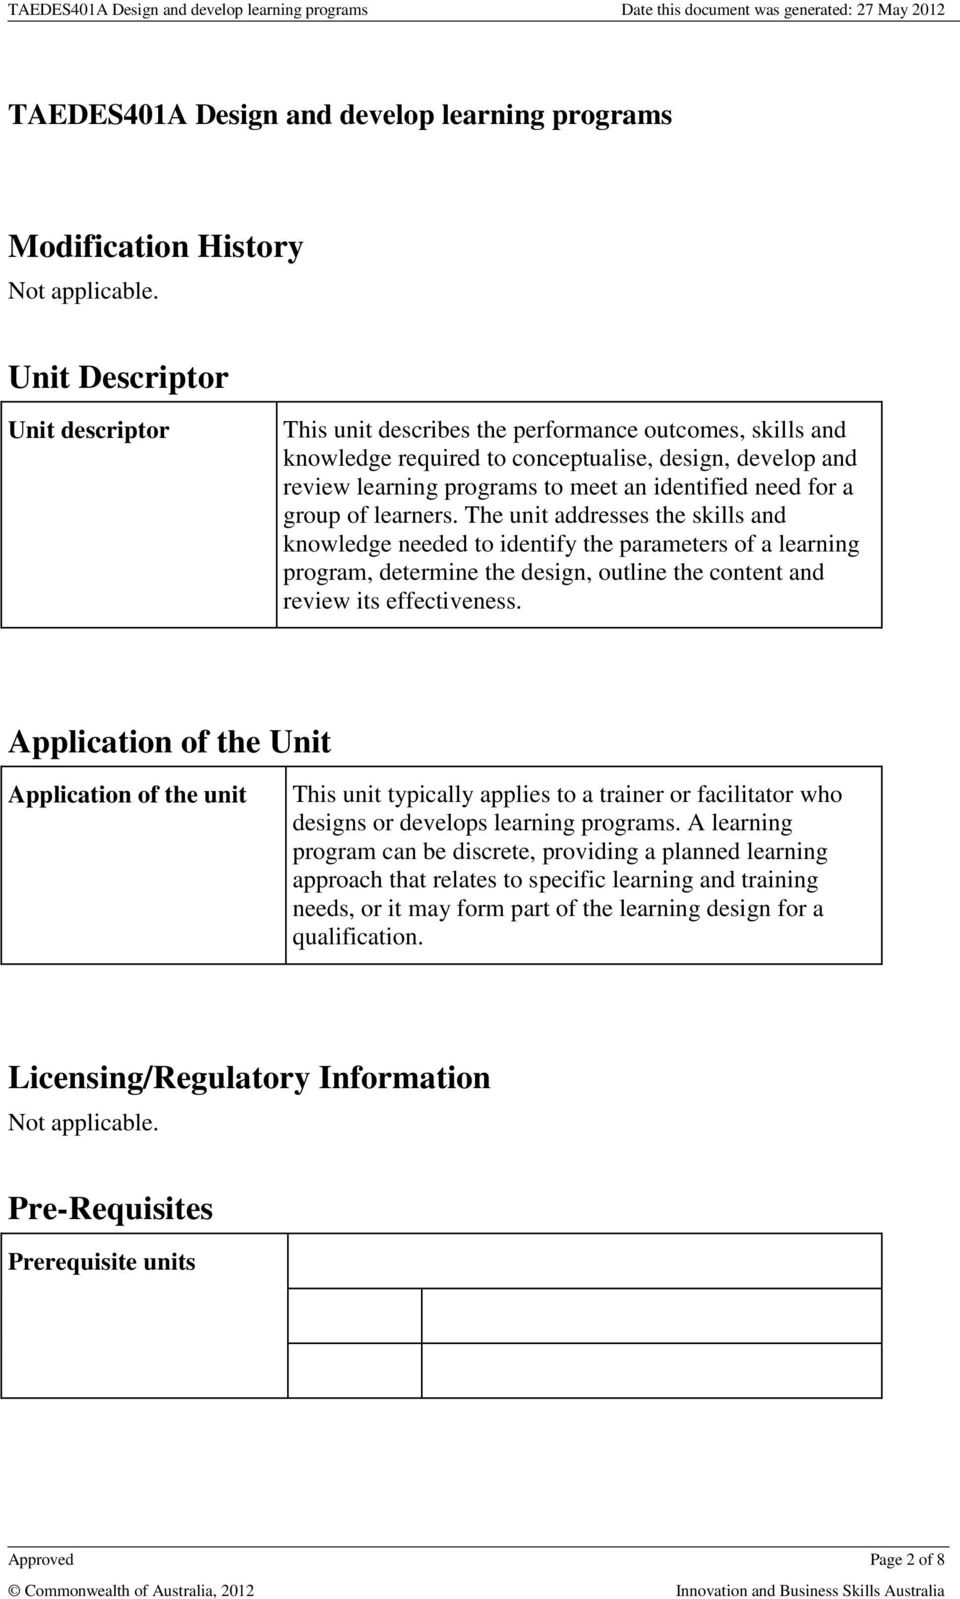 for a group of learners. The unit addresses the skills and knowledge needed to identify the parameters of a learning program, determine the design, outline the content and review its effectiveness.